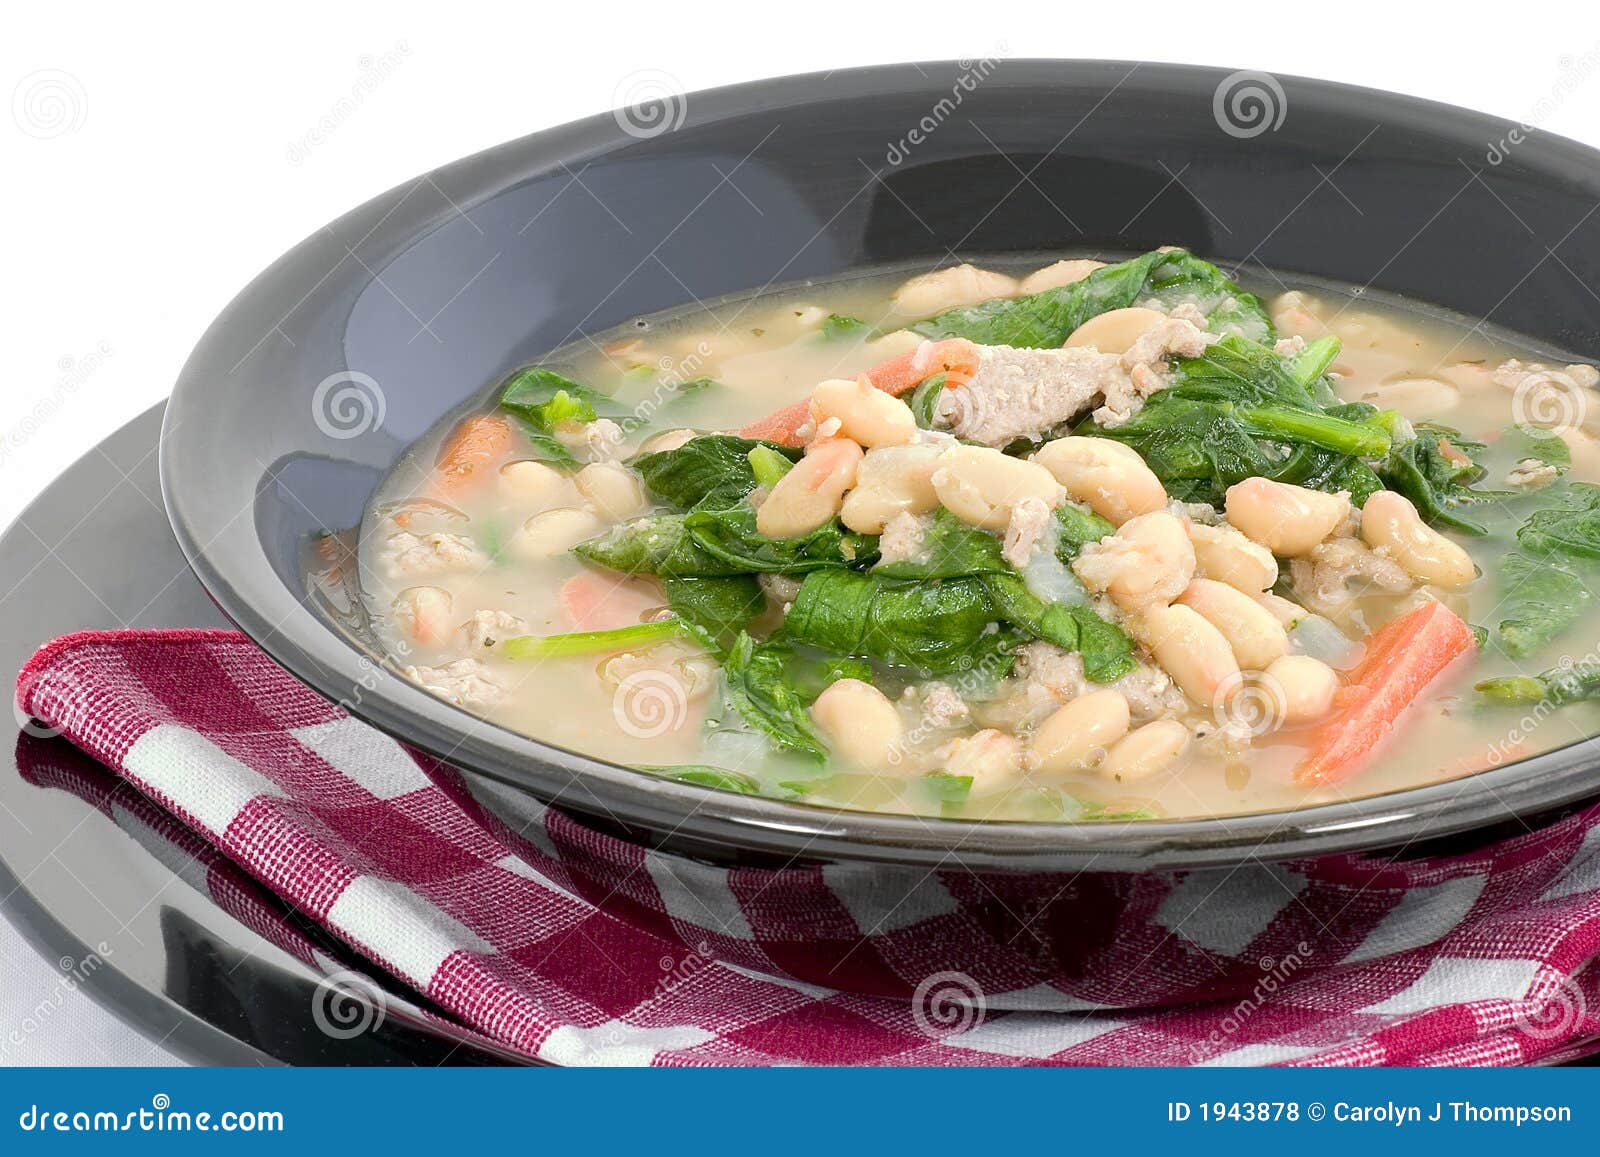 Hearty bean soup stock photo. Image of lunch, dinner, orange - 1943878